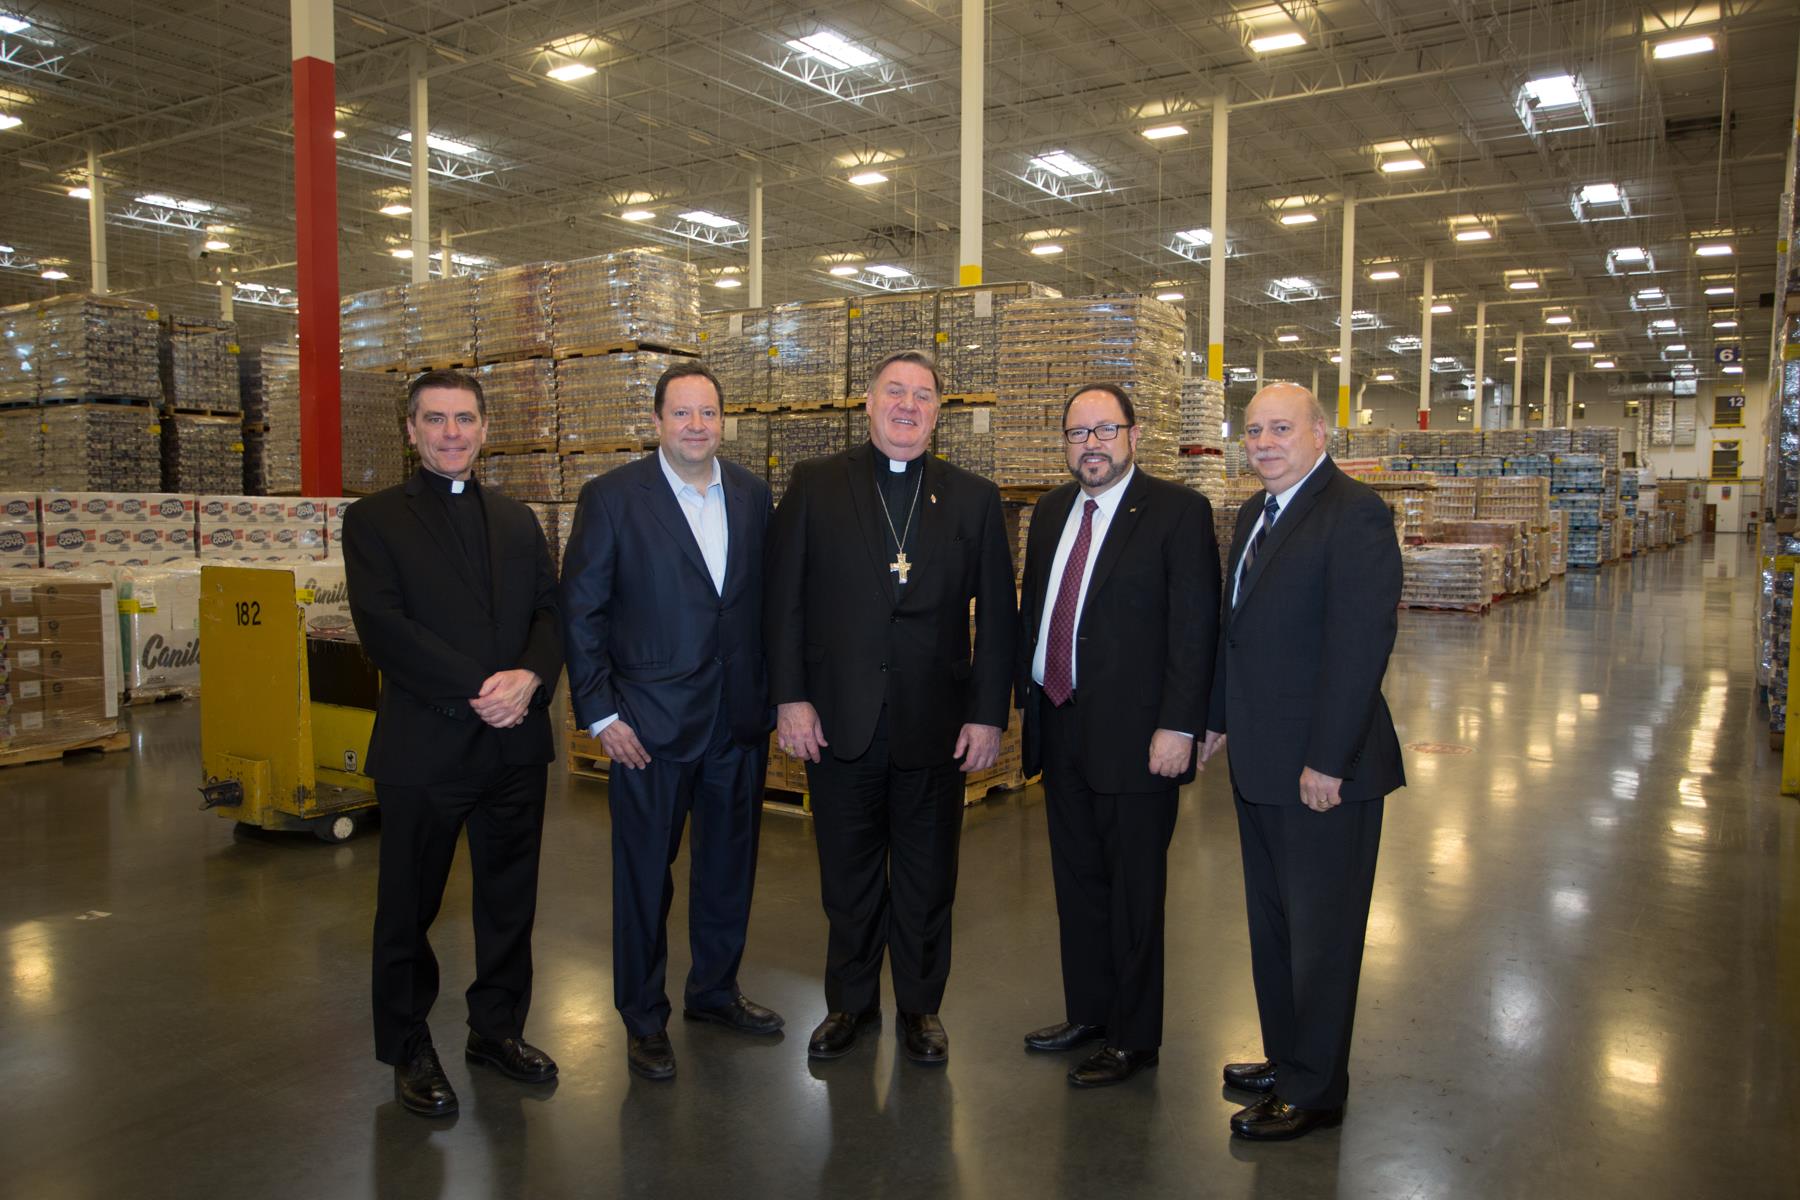 Goya donates an additional 200,000 lbs of food to families in need throughout New Jersey